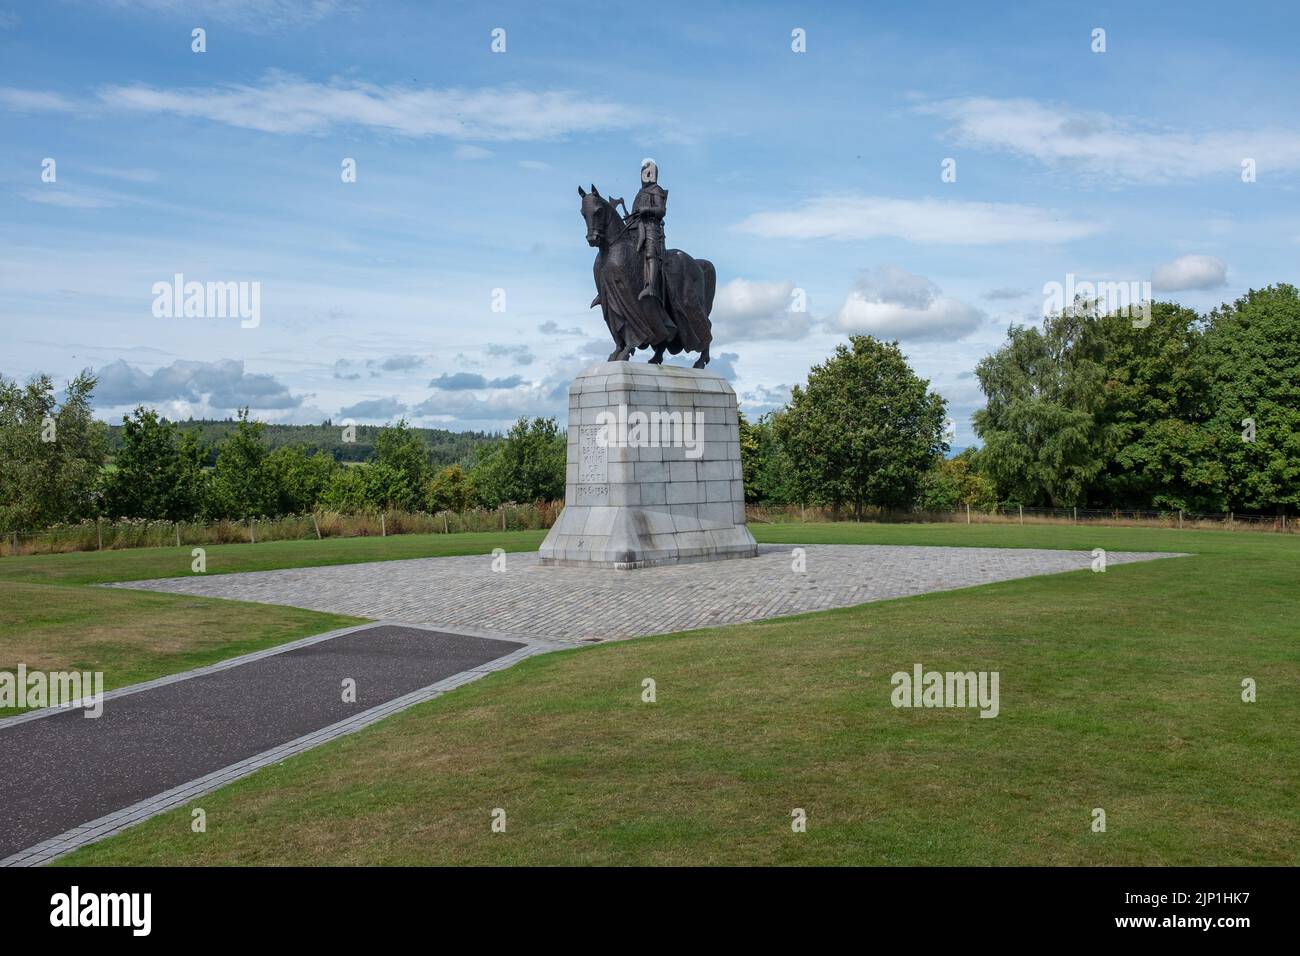 Bronze equestrian statue of Robert the Bruce on plinth at site of battle of Bannockburn. Stock Photo